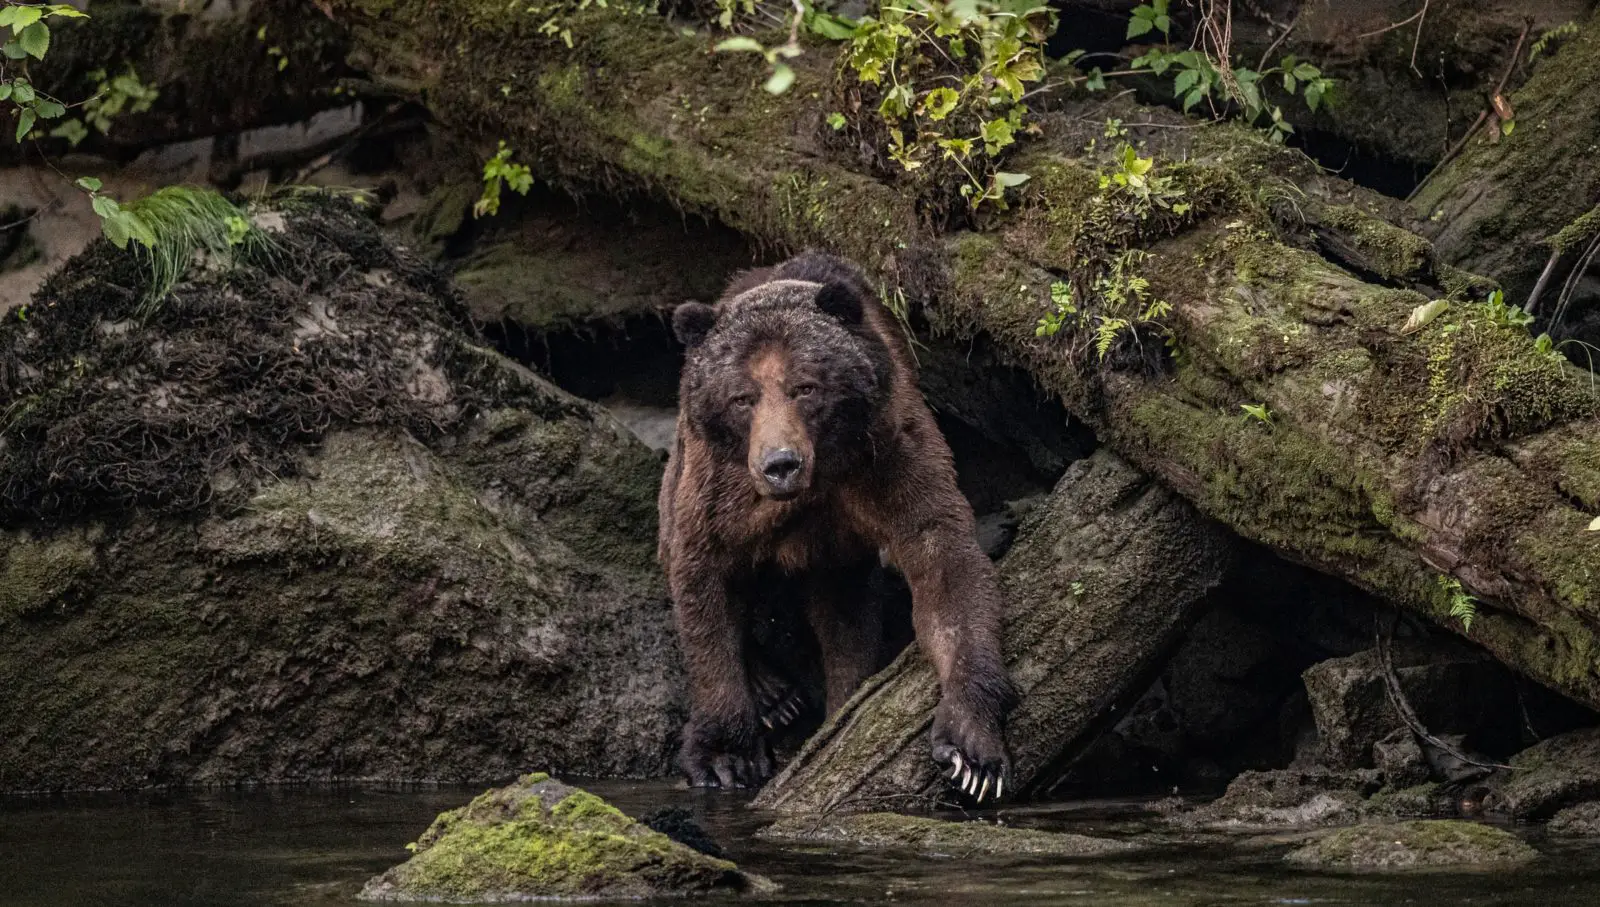 A grizzly bear along British Columbia's coast